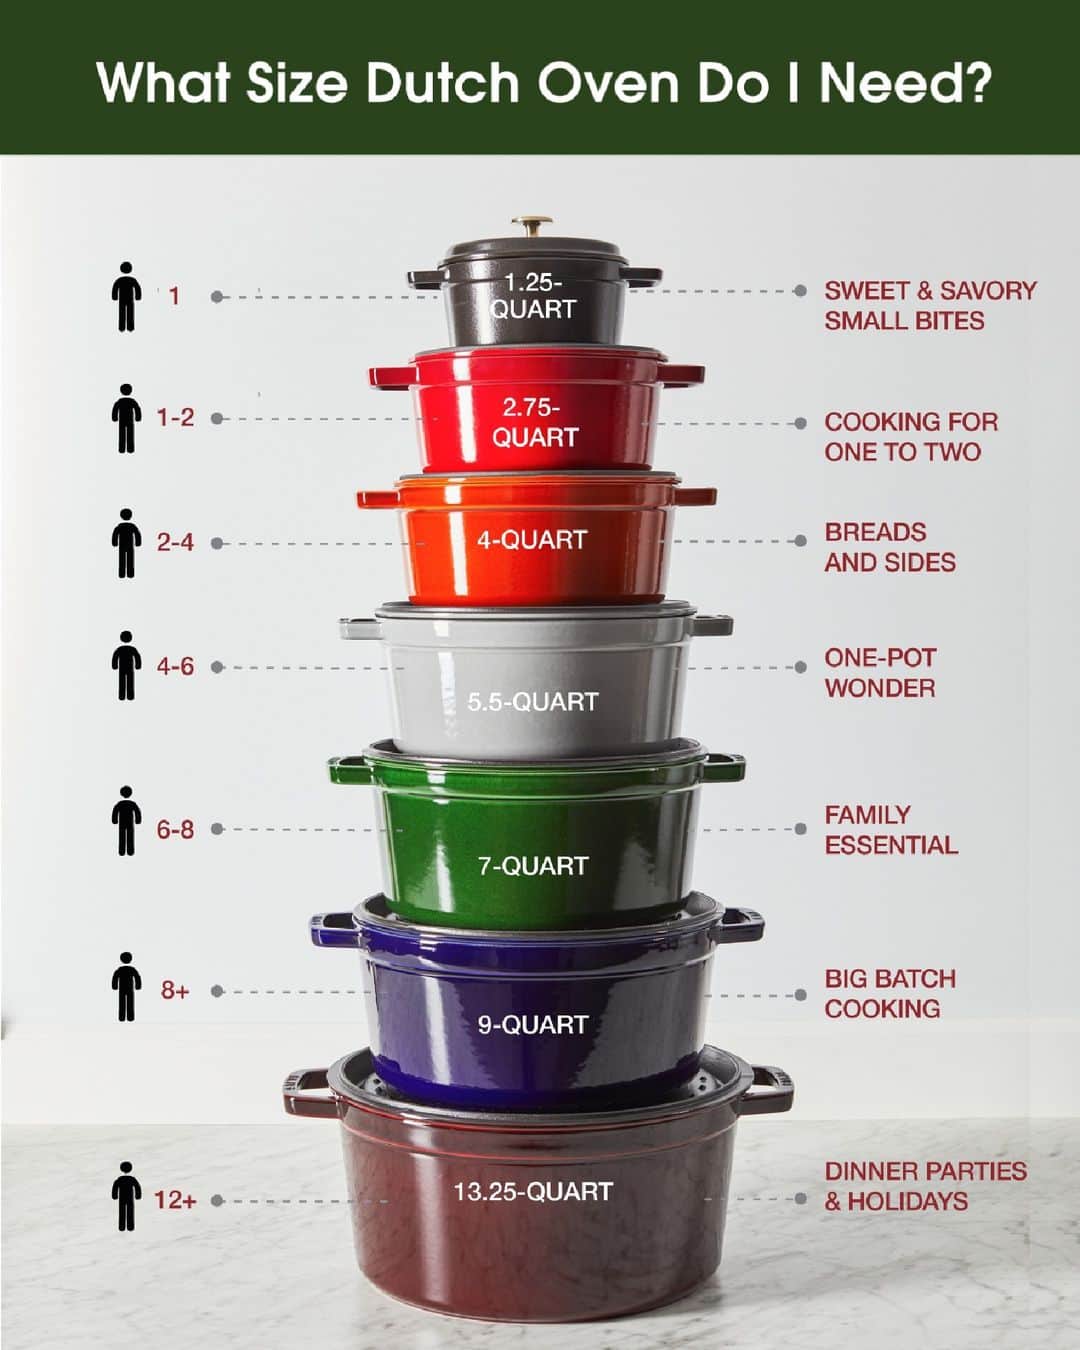 Staub USA（ストウブ）のインスタグラム：「Find the perfect cocotte size for you. From dishing up small bites to hosting dinner parties for a dozen of your best friends, we have everything you need. Let us know which size you use the most in the comments below and find these sizes and more in our Instagram Shop. #madeinstaub #castiron #cocotte #dutchoven」